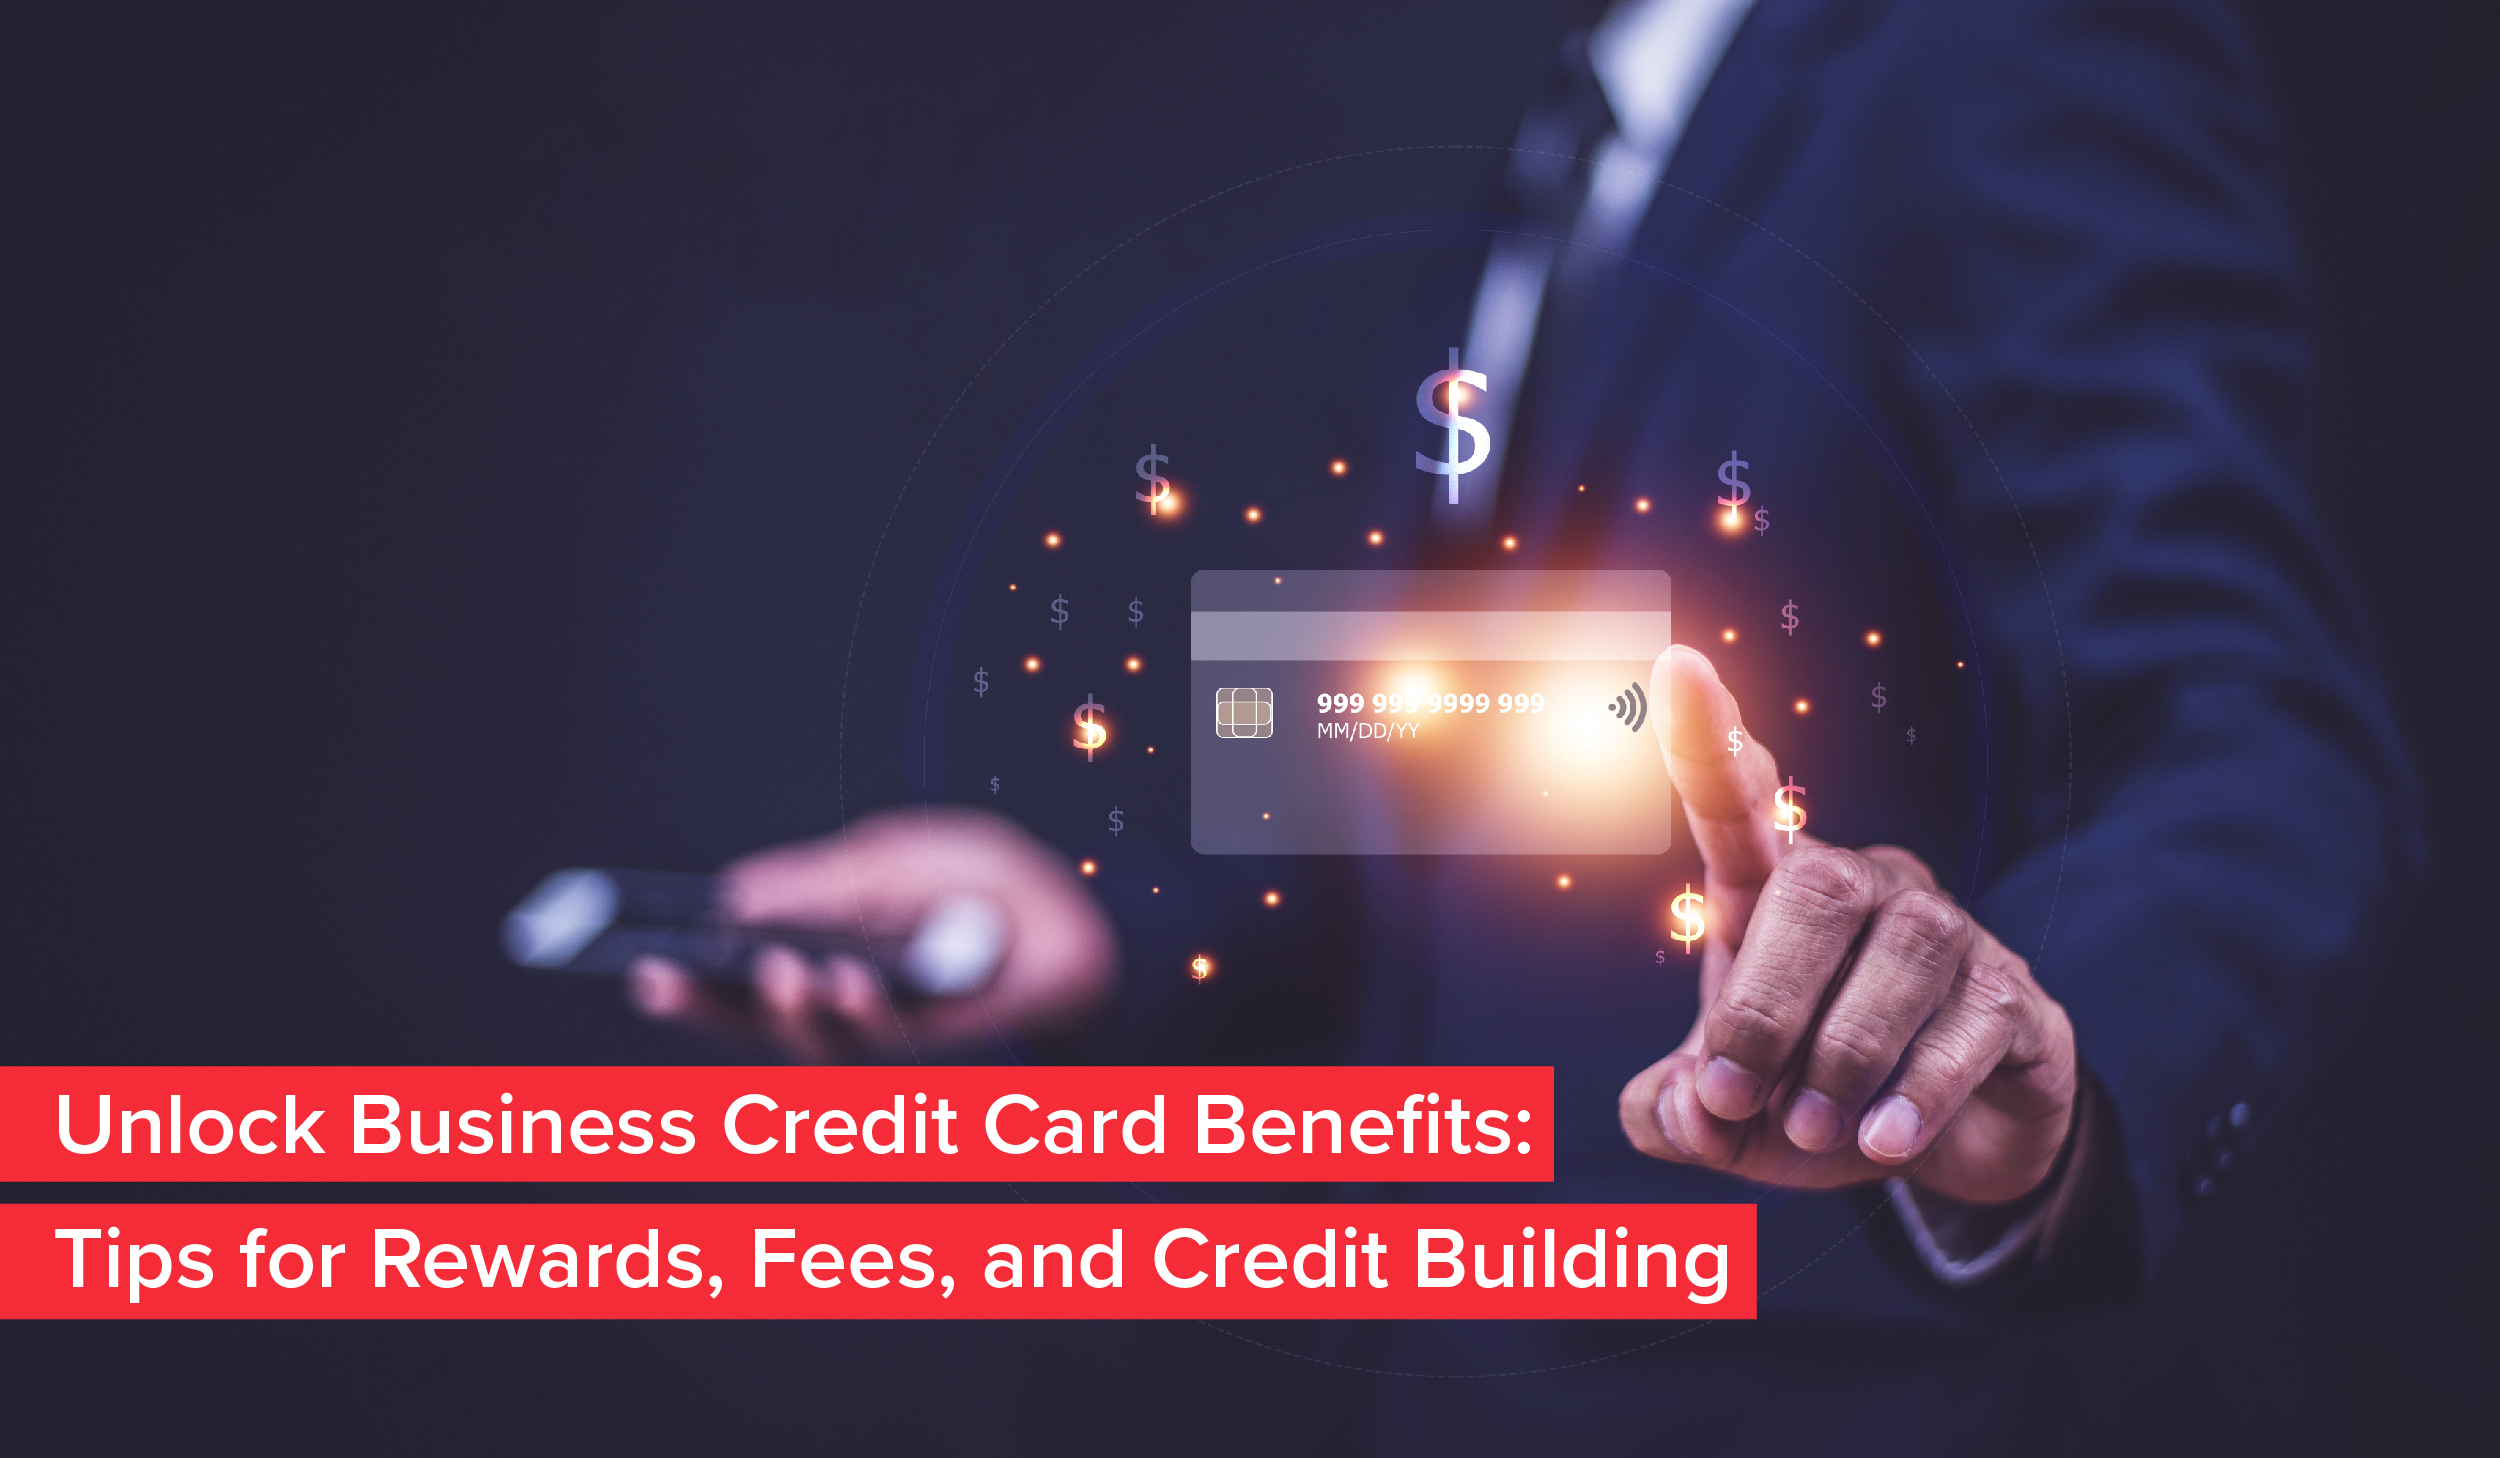 Unlock Business Credit Card Benefits Tips for Rewards, Fees, and Credit Building